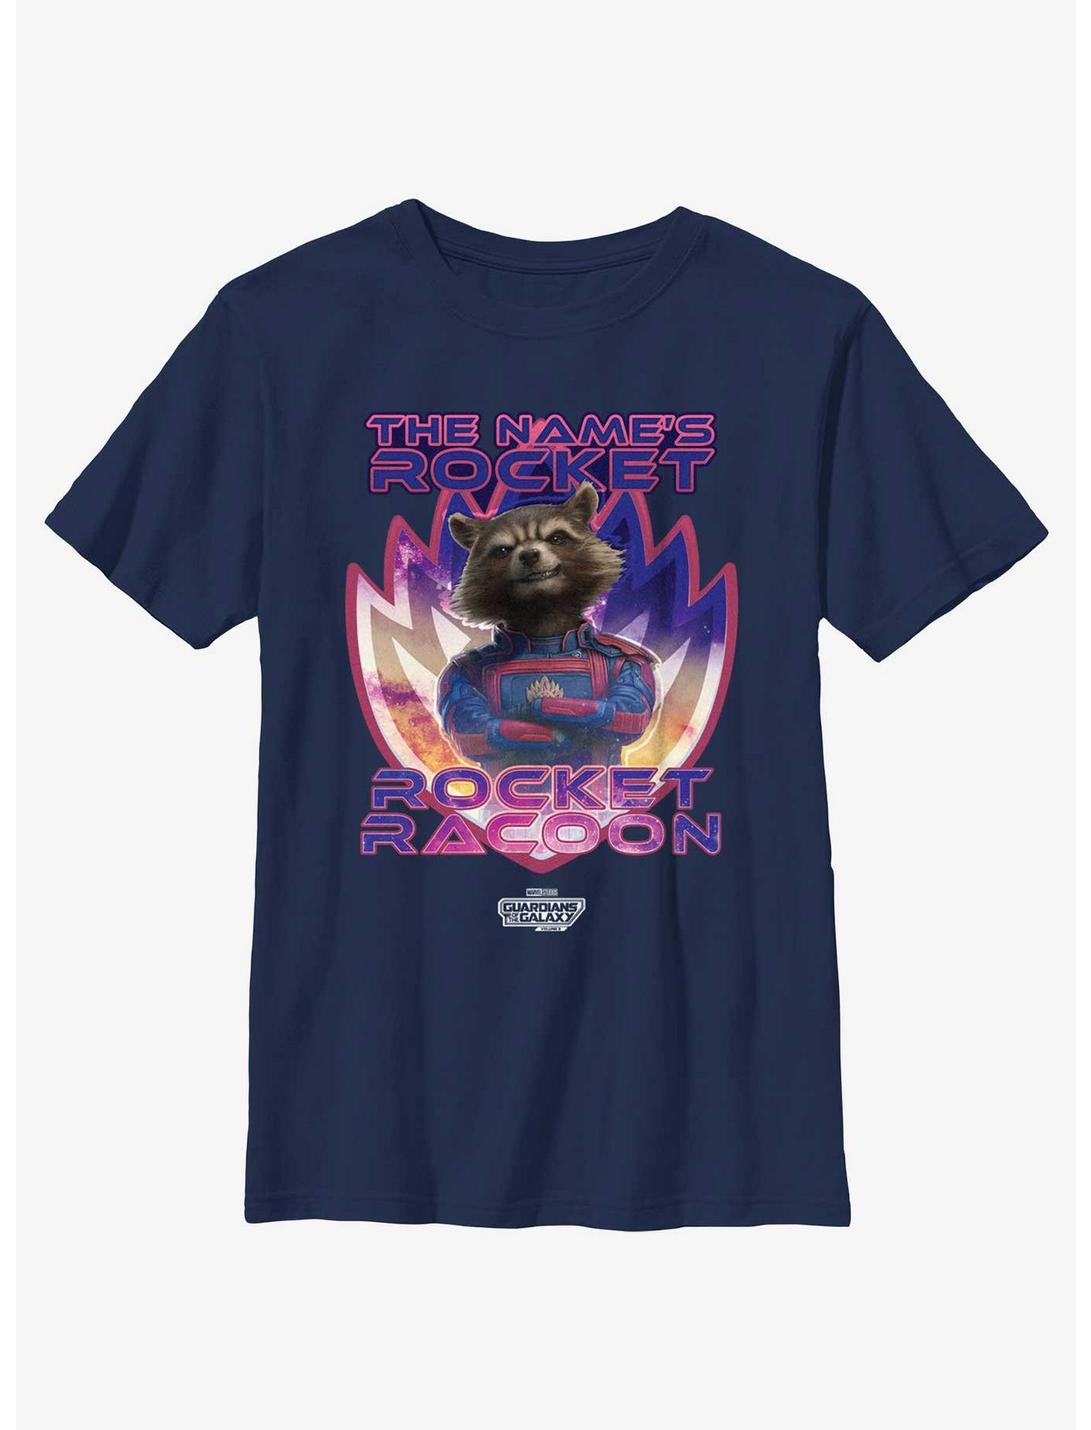 Guardians Of The Galaxy Vol. 3 The Name's Rocket Racoon Youth T-Shirt, NAVY, hi-res